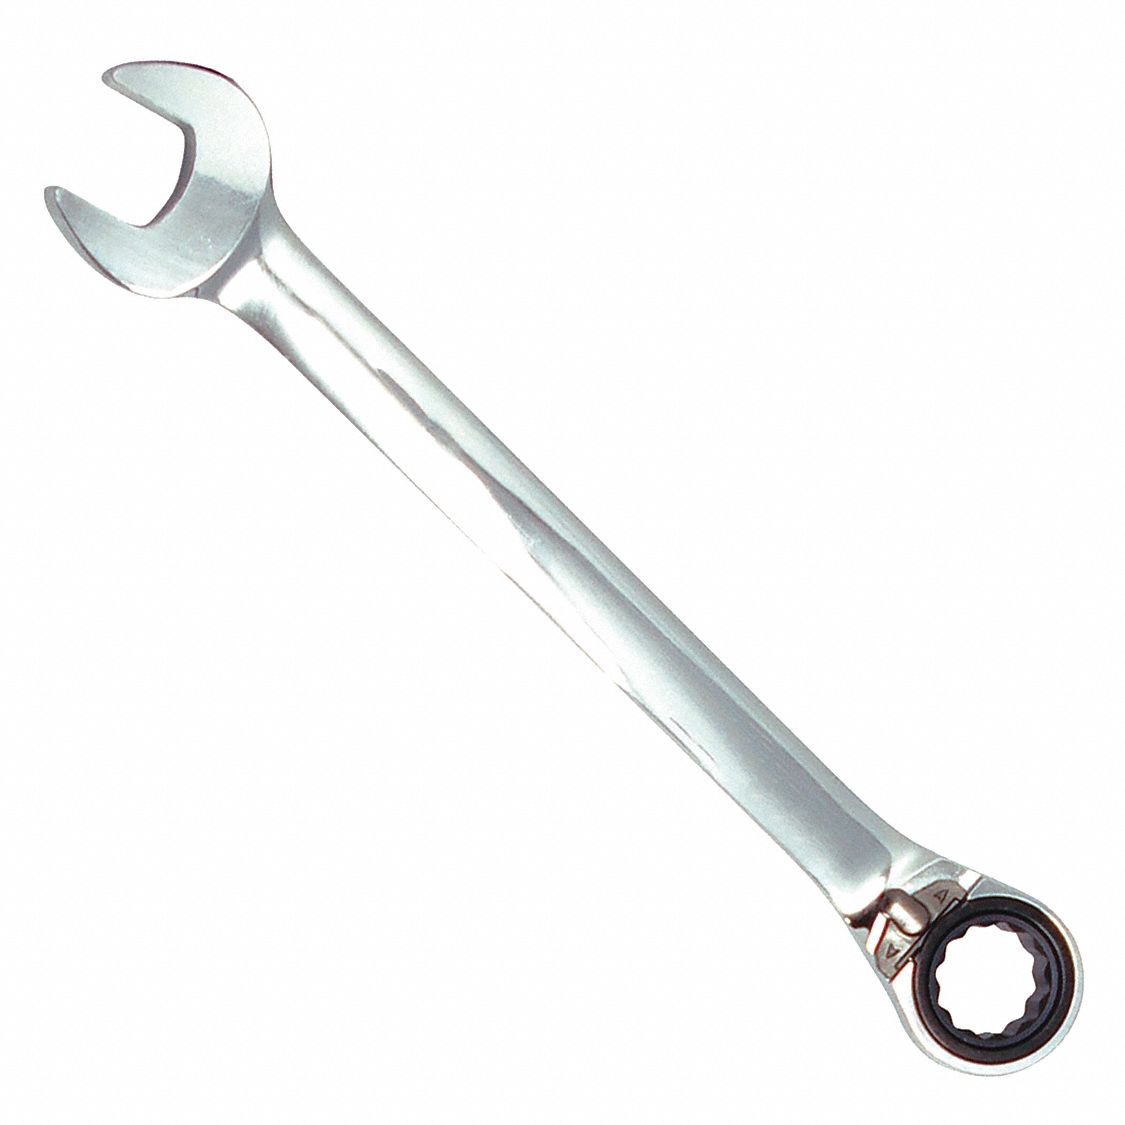 Combination Wrench: Alloy Steel, Chrome, 3/8 in Head Size, 6 1/4 in Overall Lg, Offset